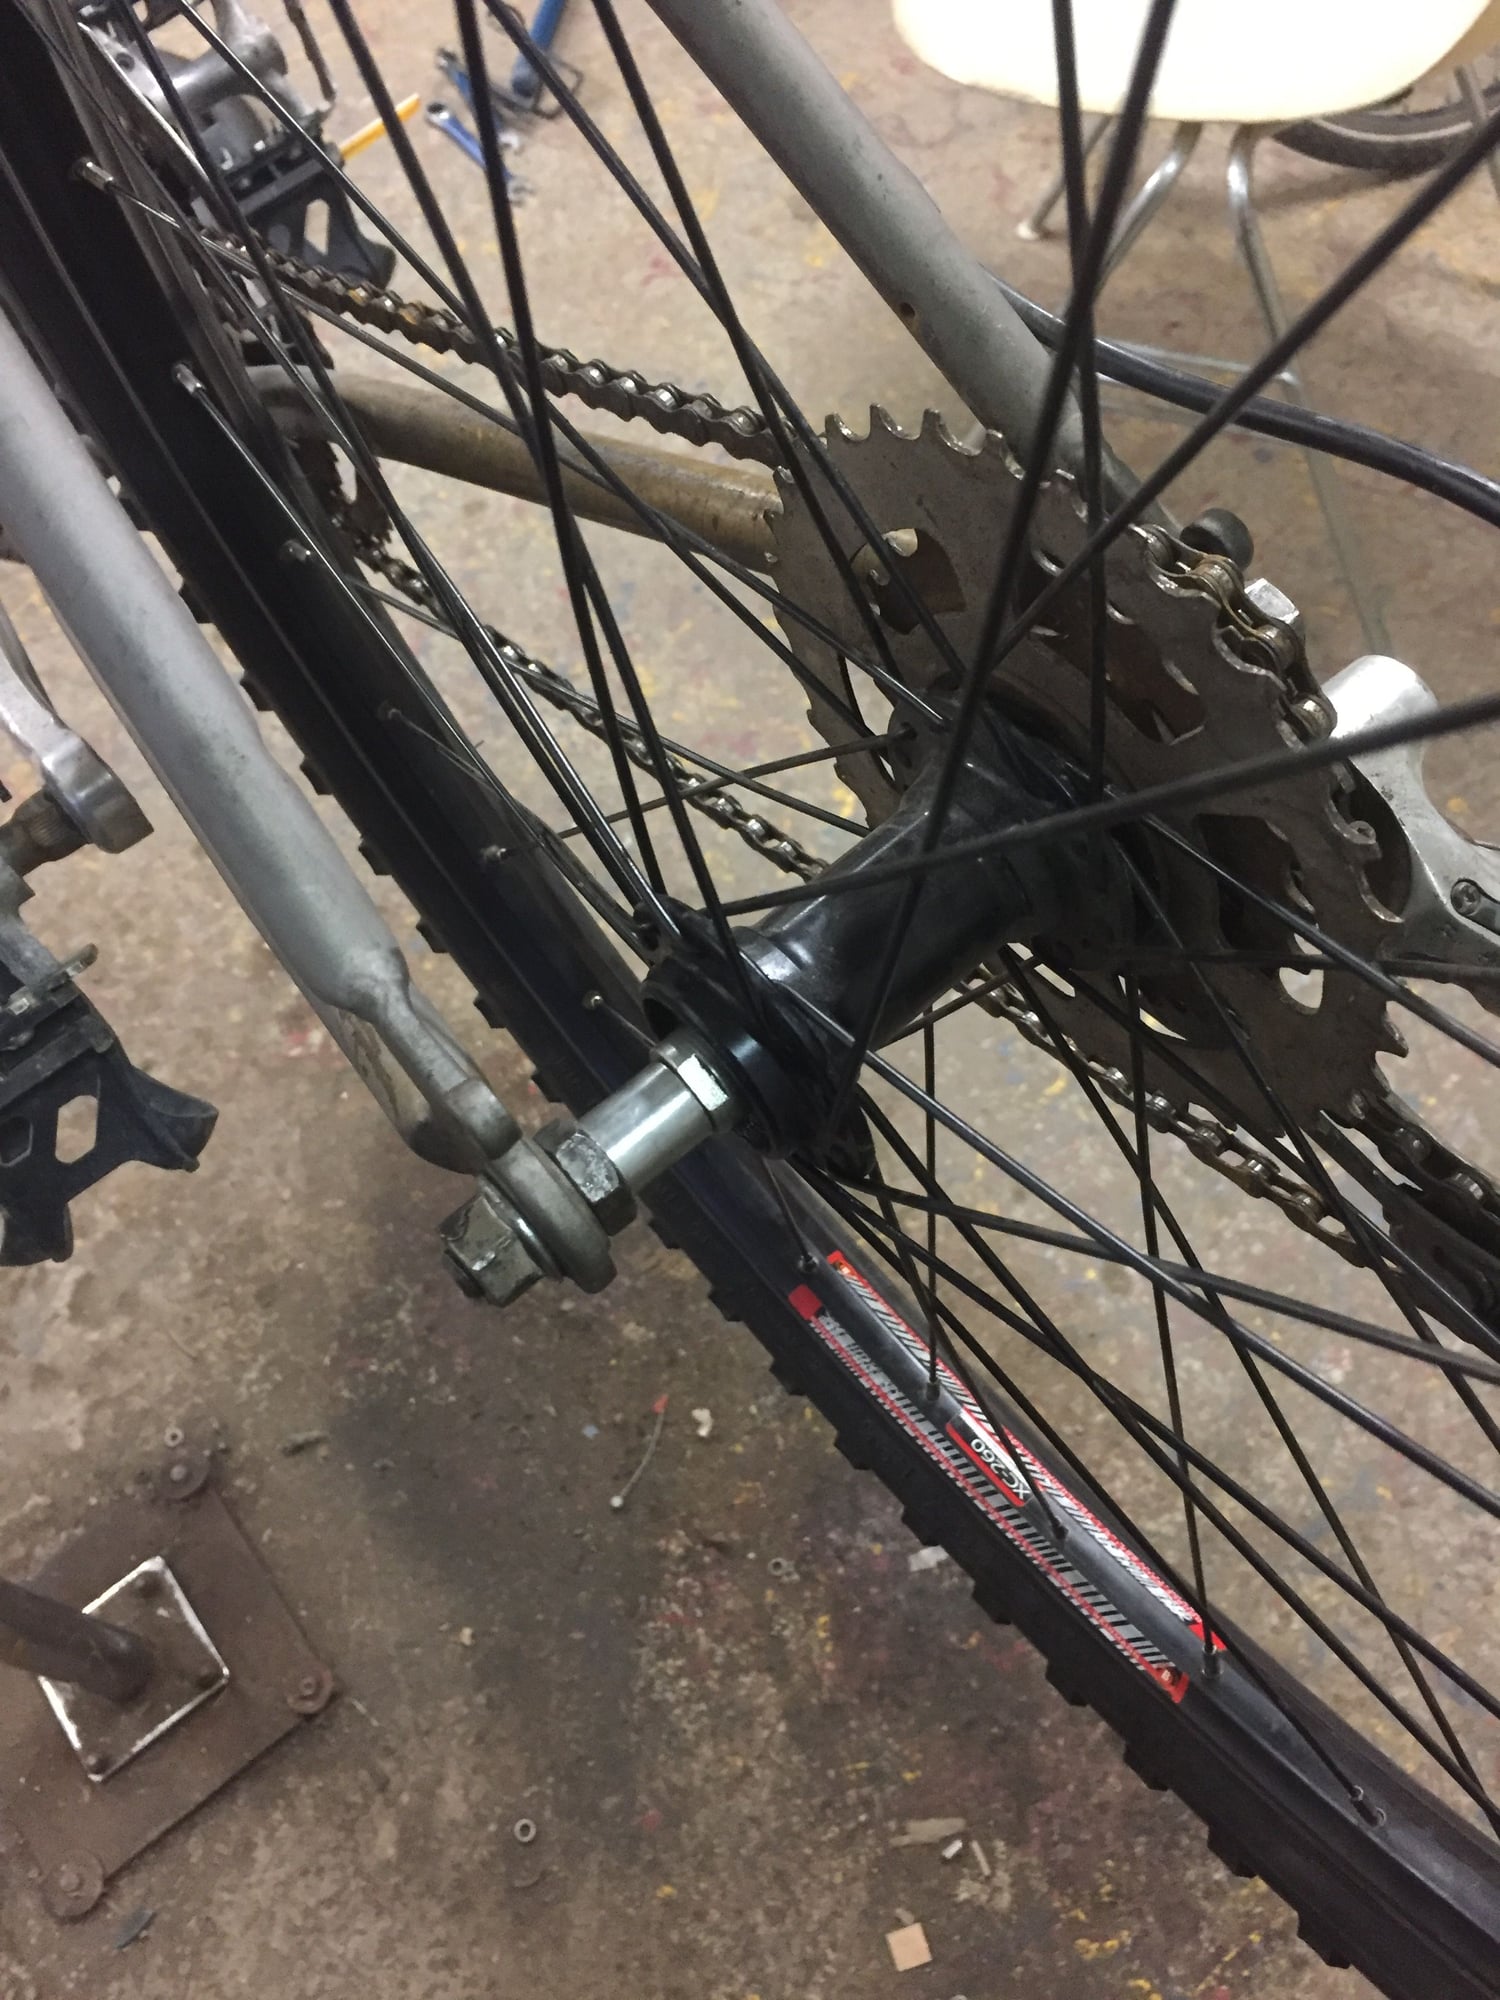 Axle spacer for a narrow hub - Bike Forums